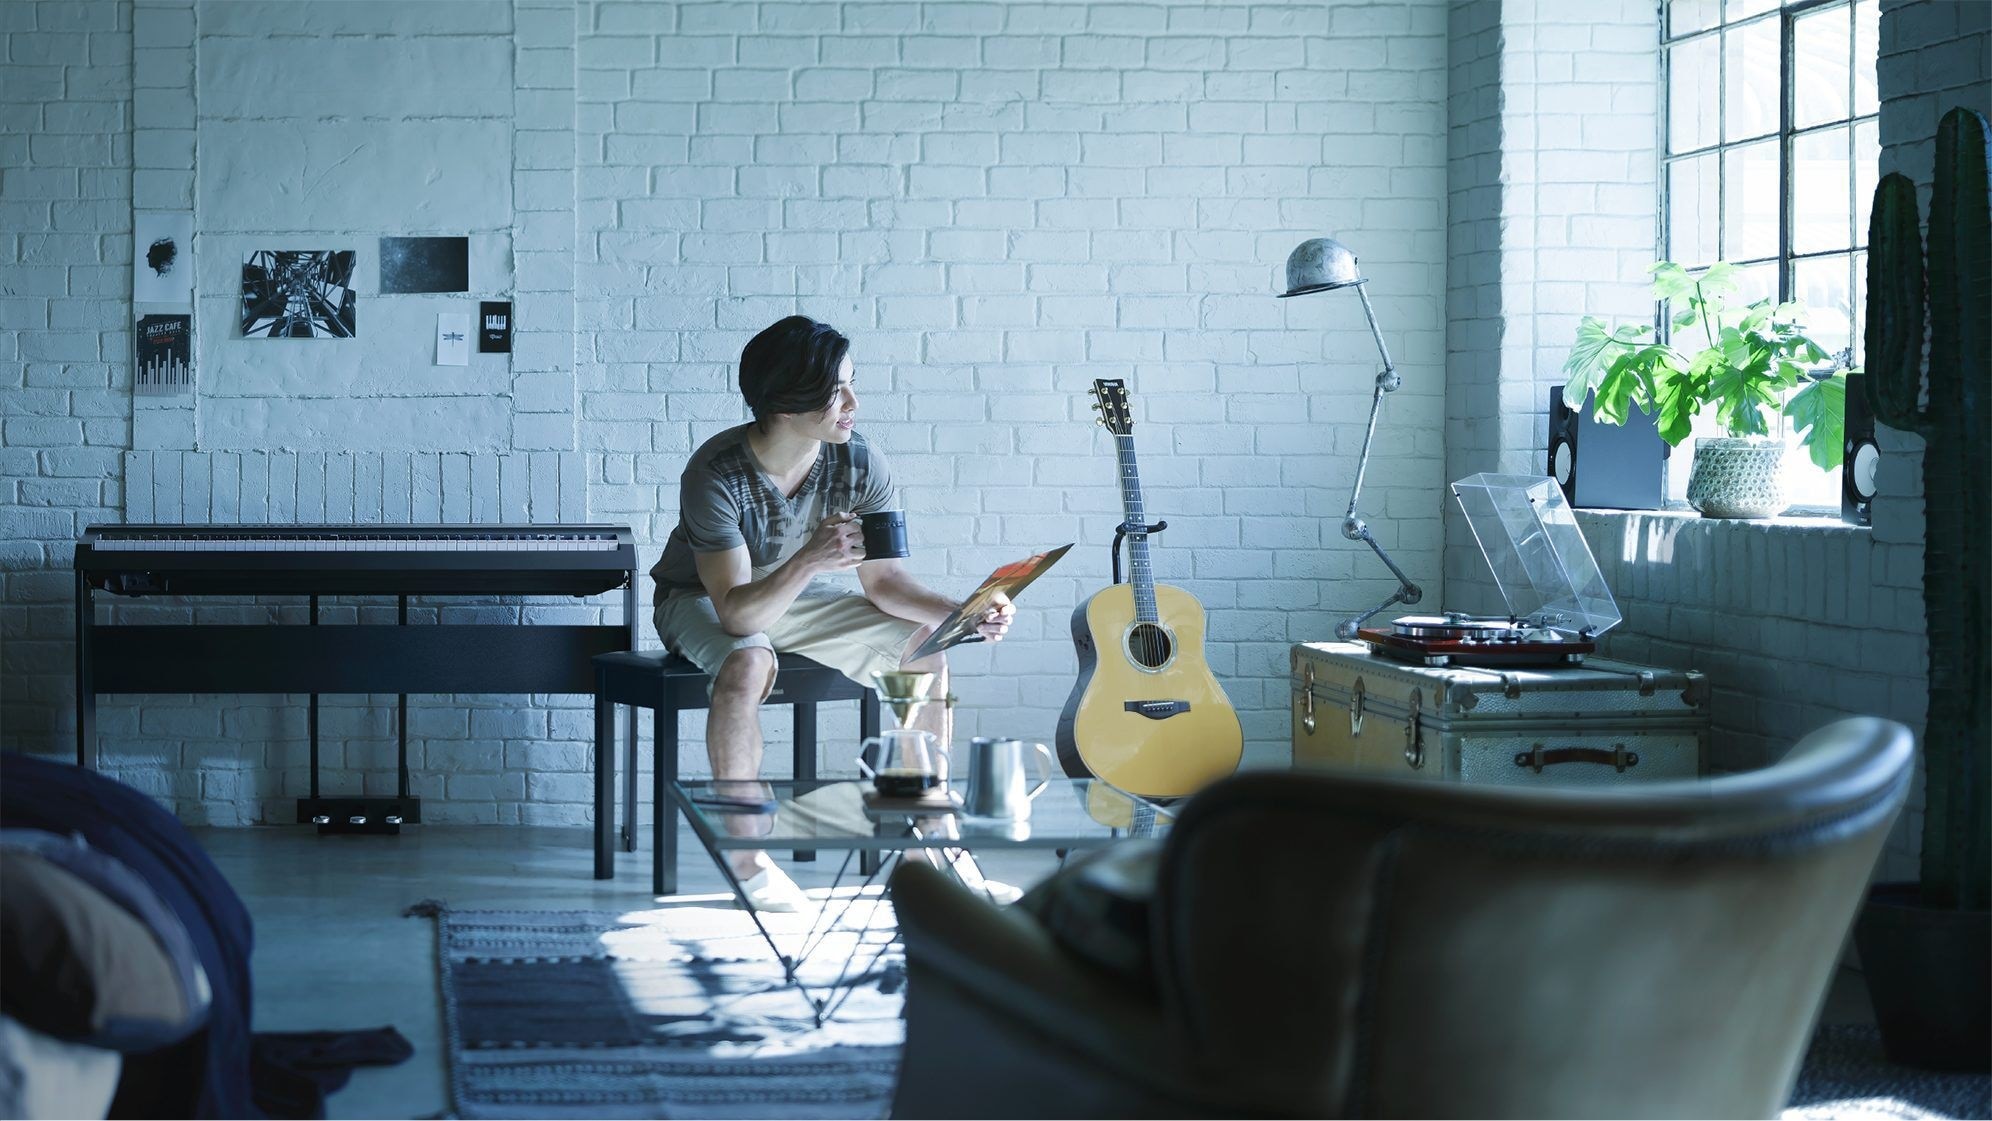 A young adult in a loft-style living room surrounded by an electronic keyboard, a guitar on a stand and amplifier.